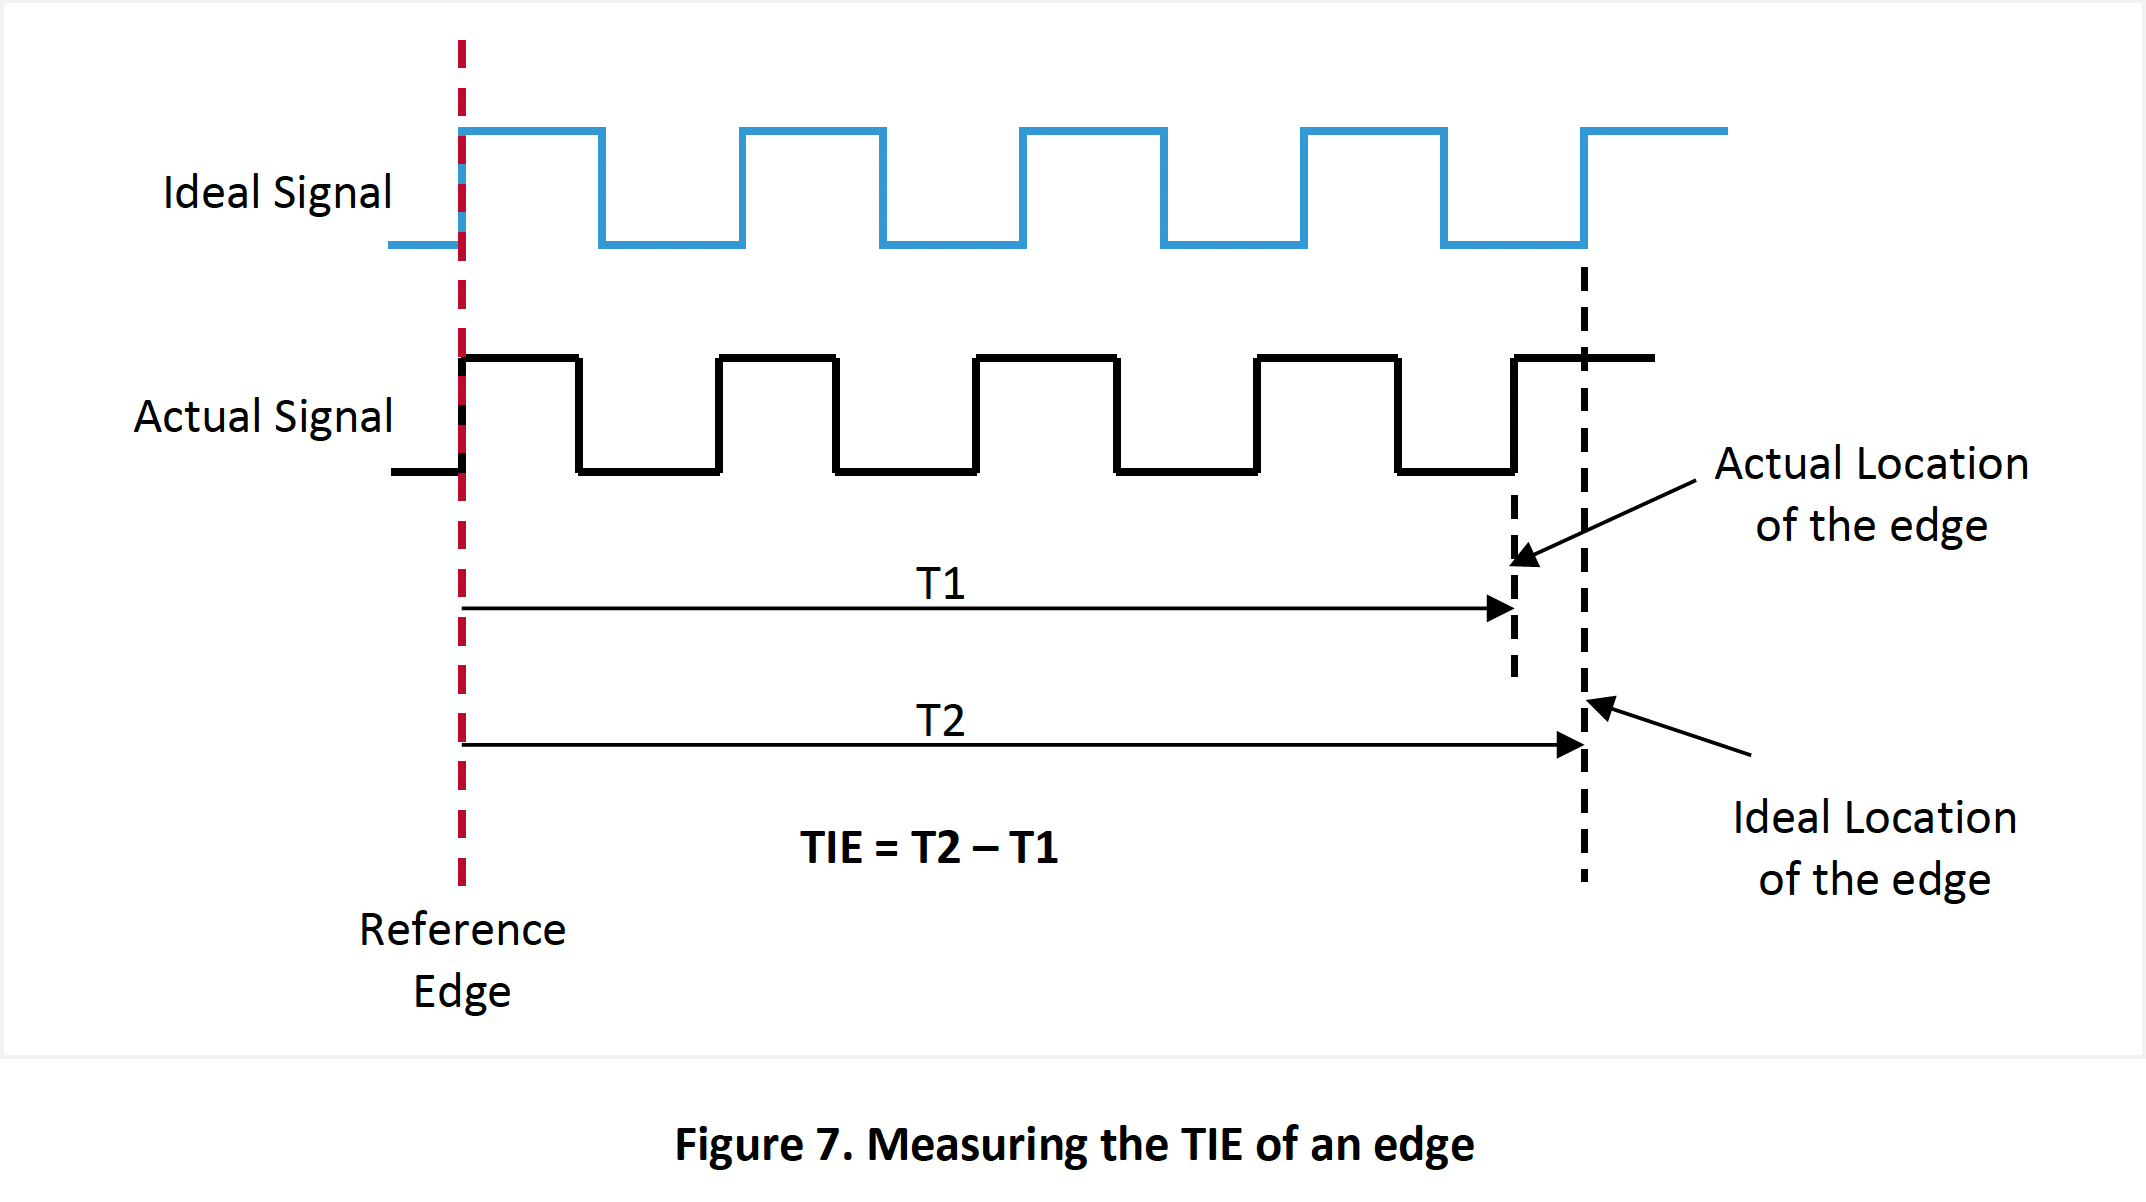 Figure 7. Measuring the TIE of an edge